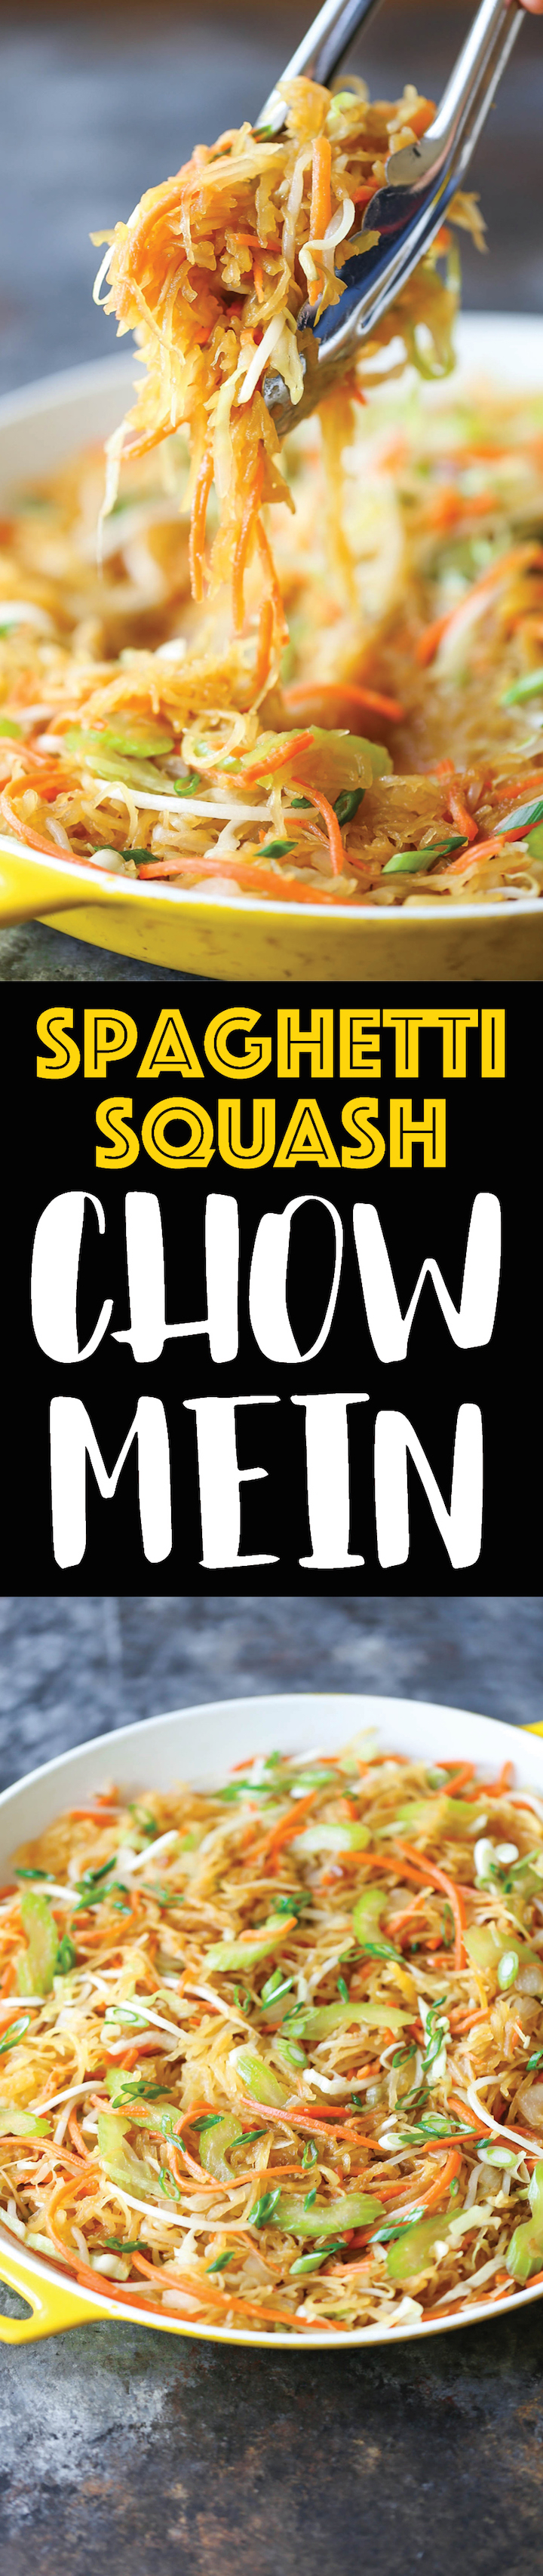 Spaghetti Squash Chow Mein - A healthier low-carb version of everyone's favorite takeout dish. Even your picky eaters will love this! Only 299 cal/serving!